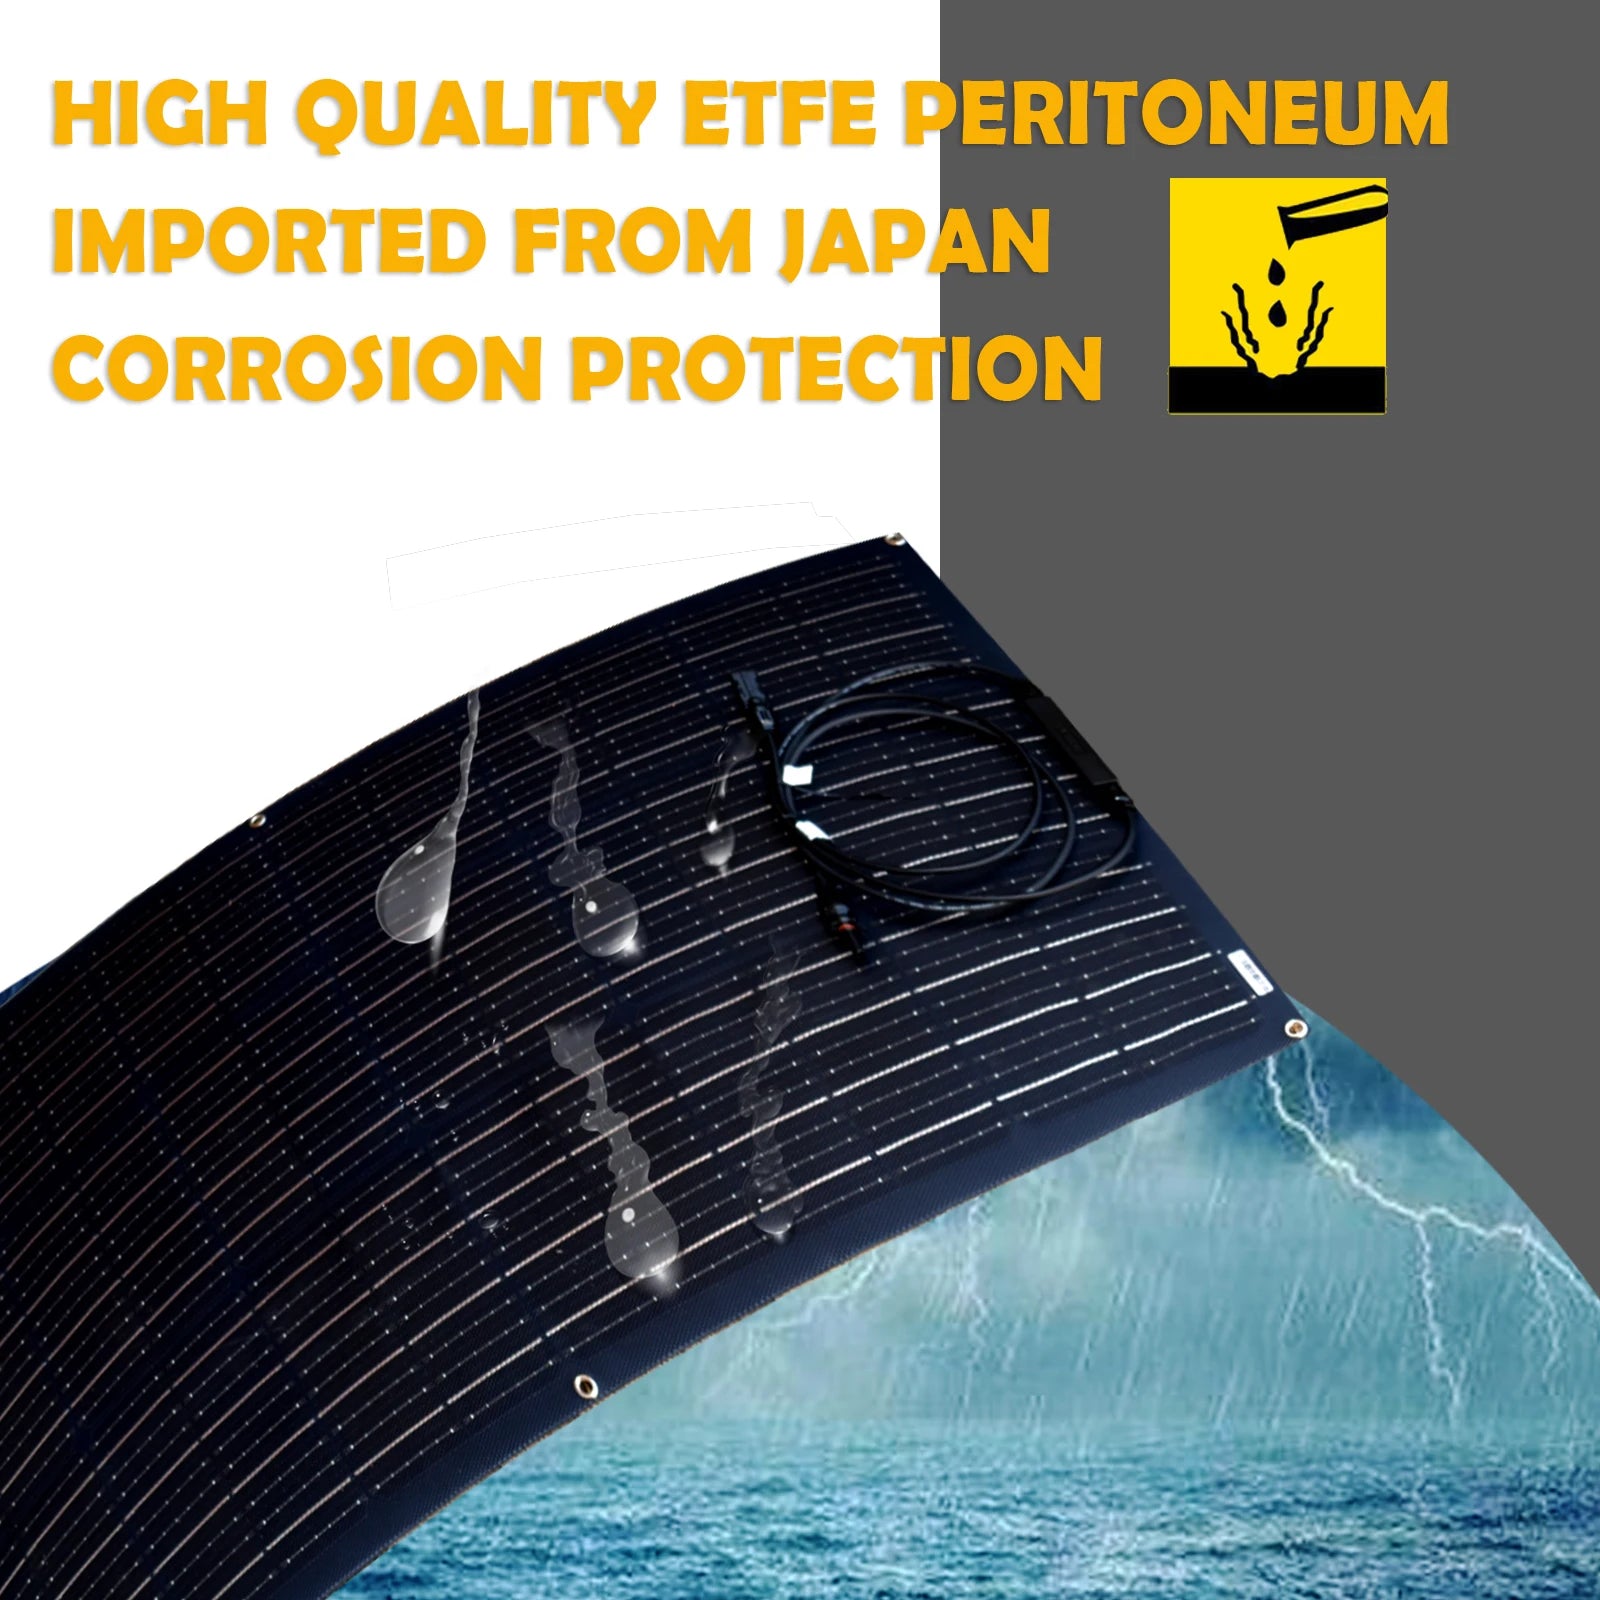 High-quality ETFE material imported from Japan provides corrosion protection.